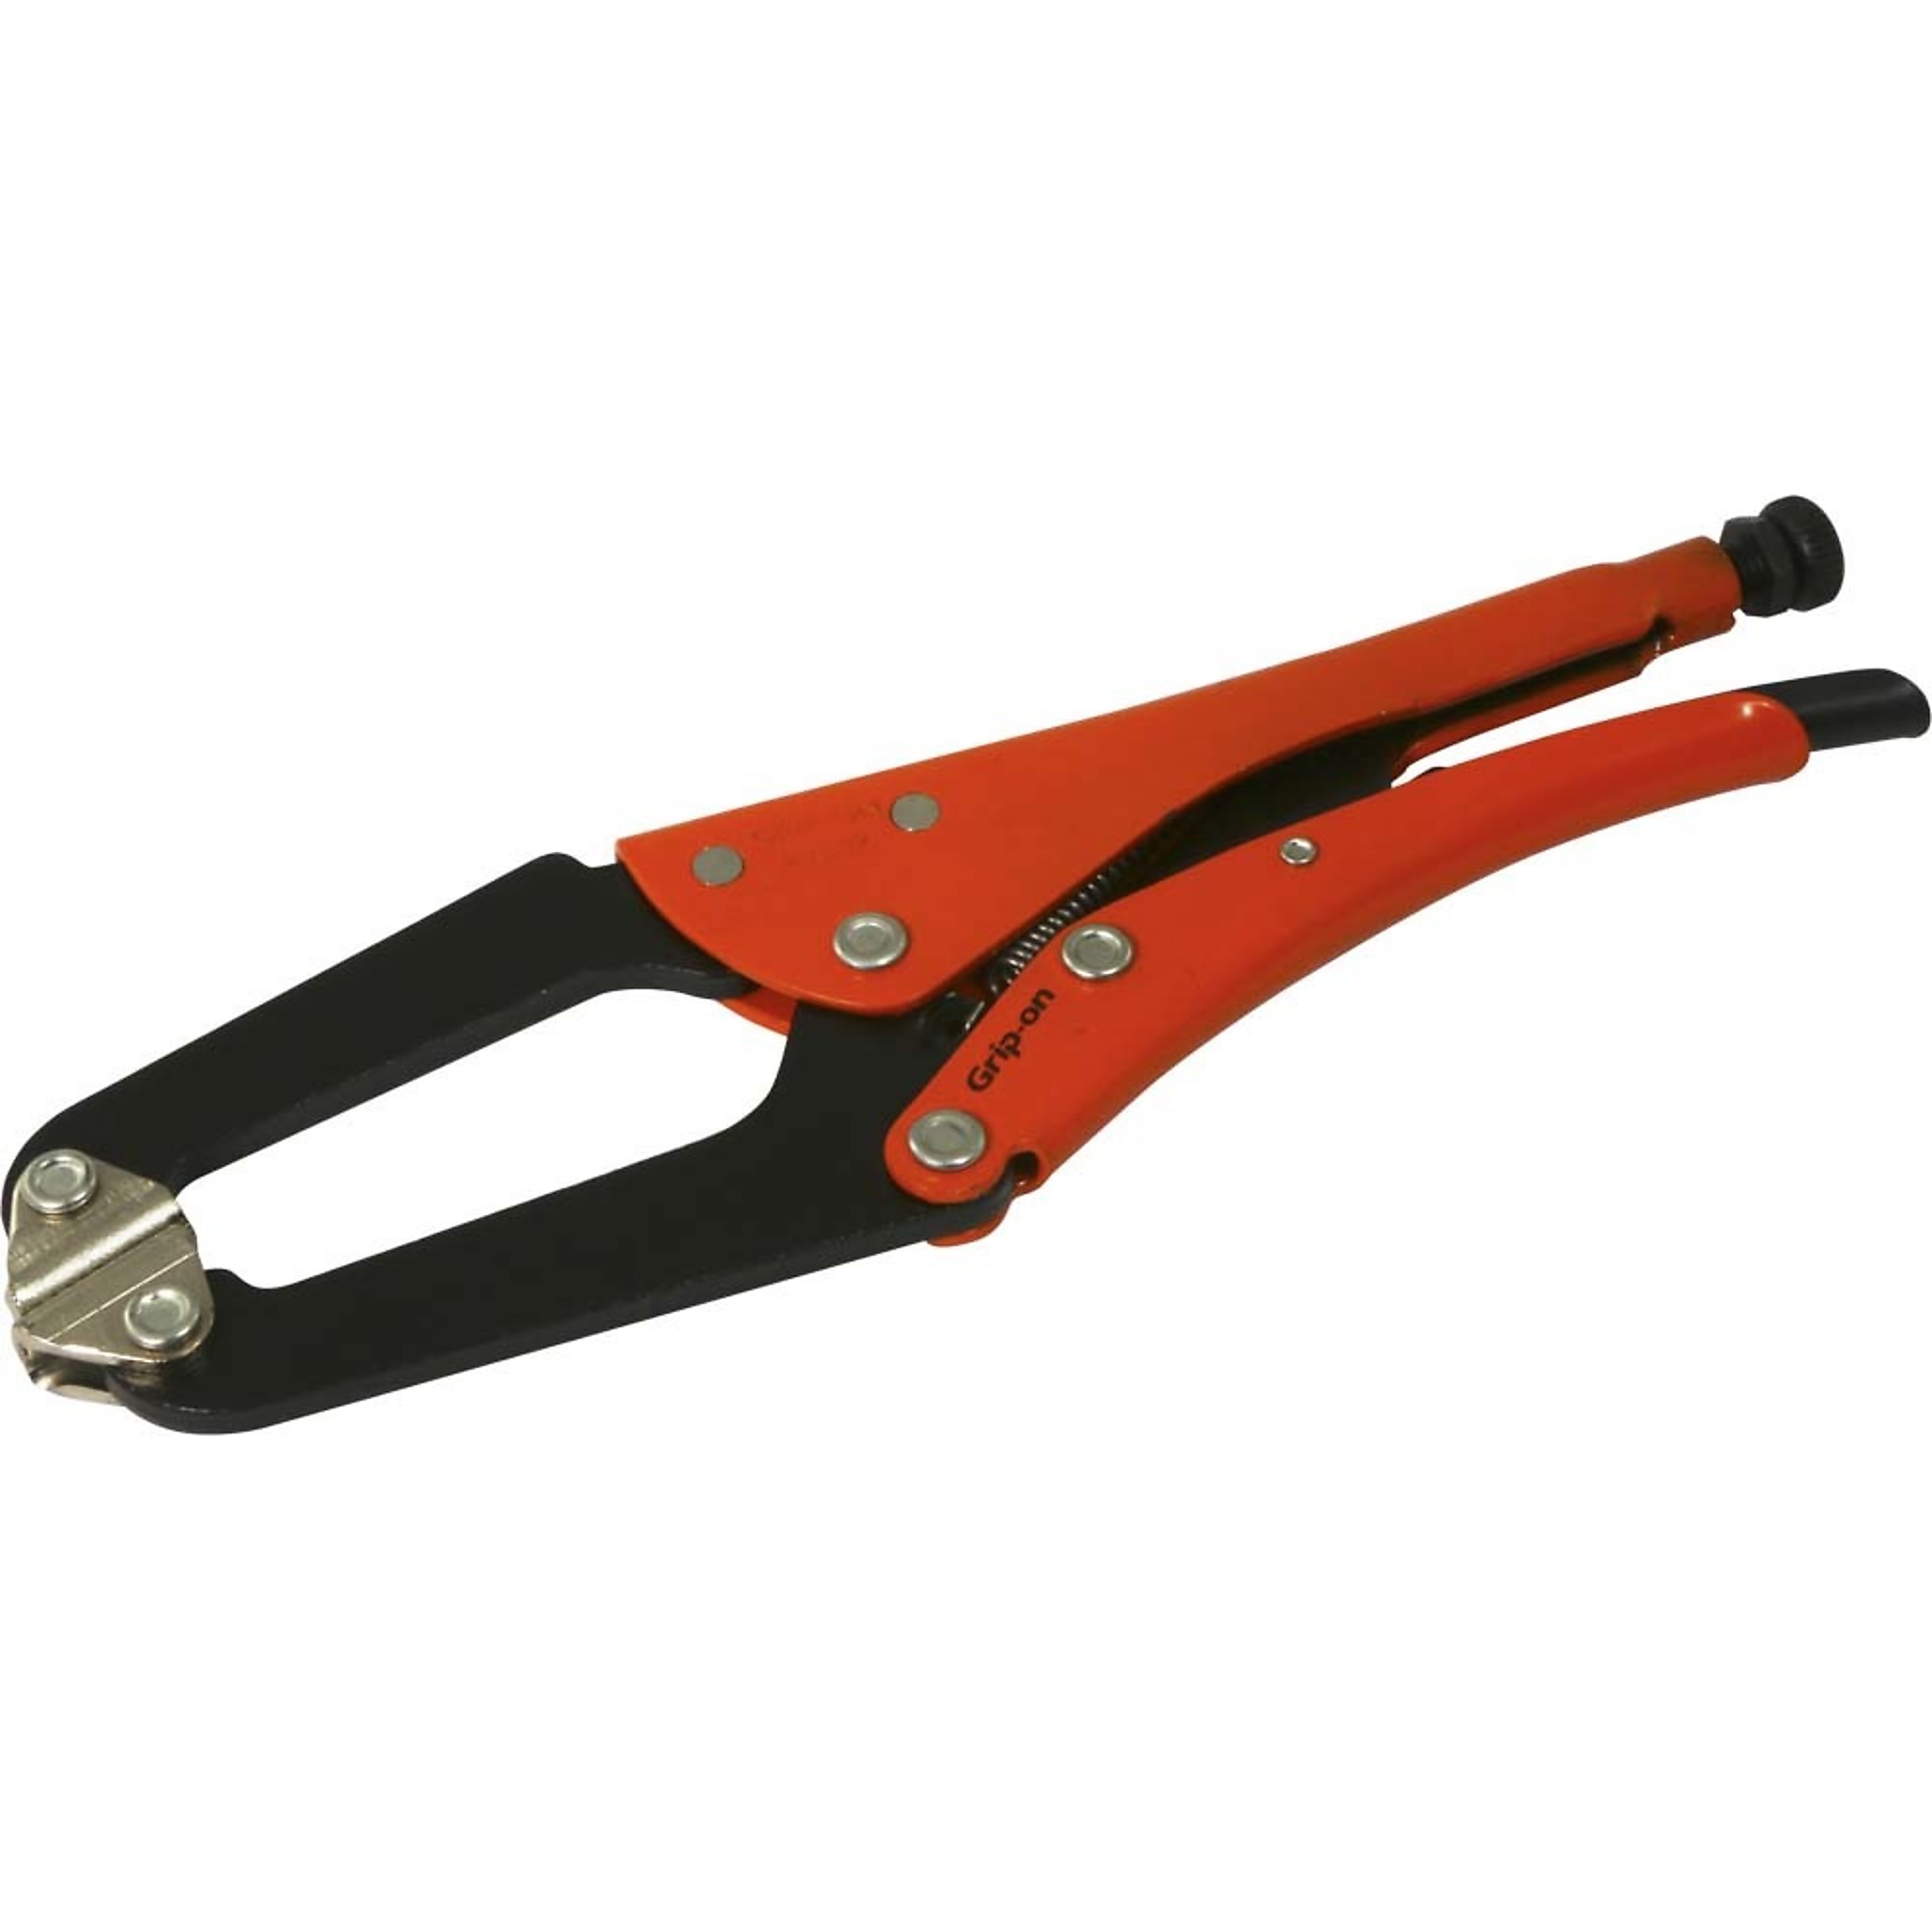 Grip-on, 12Inch Locking C-clamp Plier, Pieces (qty.) 1 Material Alloy Steel, Jaw Capacity 3.94 in, Model 233-12